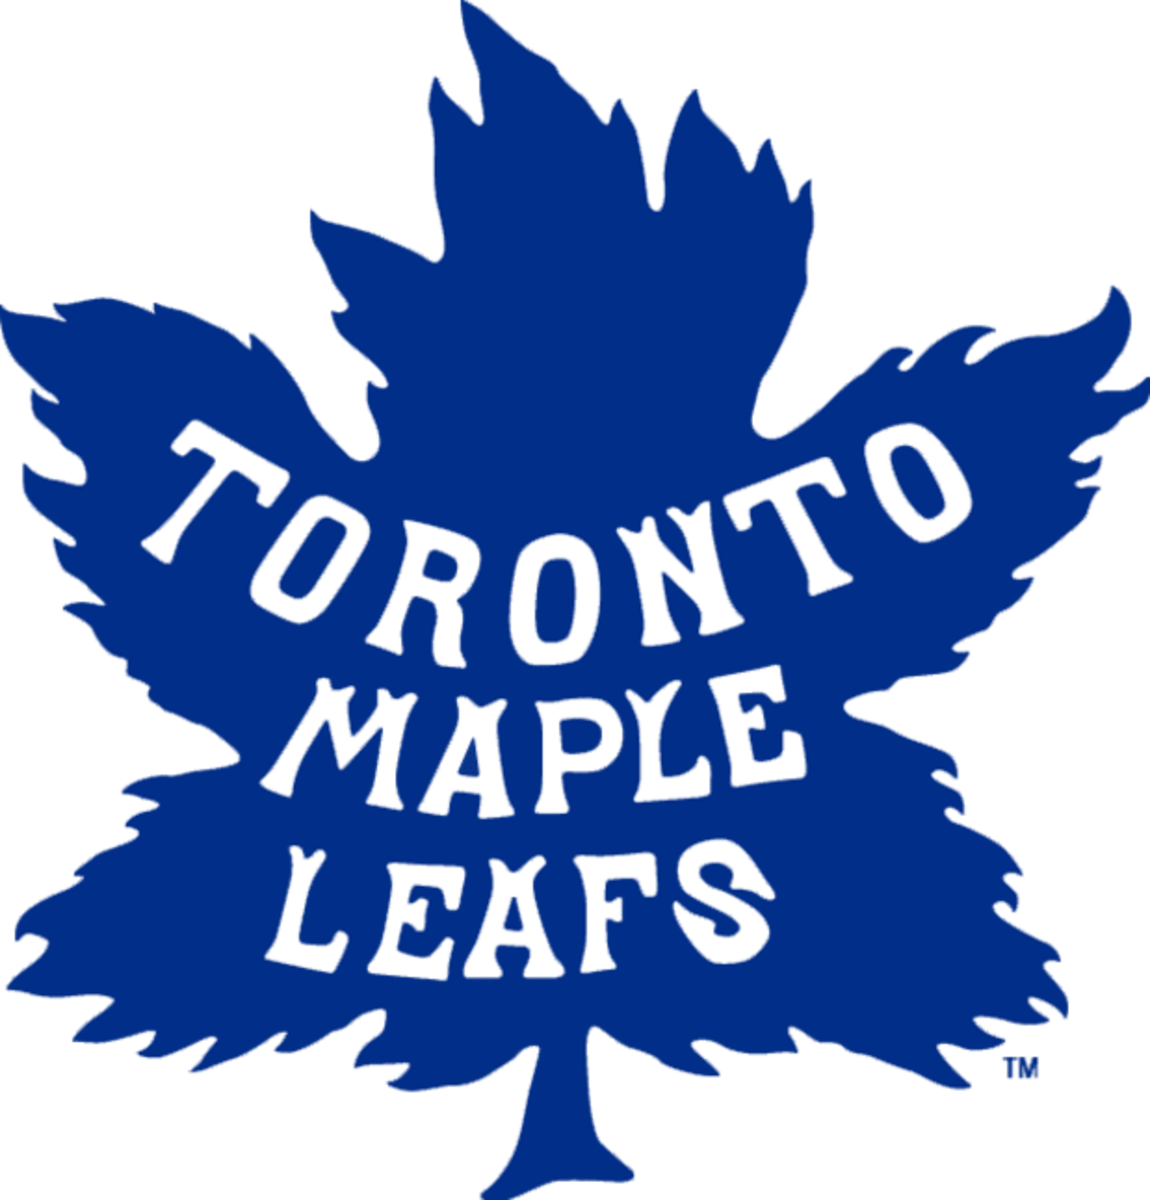 In 1962, the Toronto Maple Leafs won the Stanley Cup.